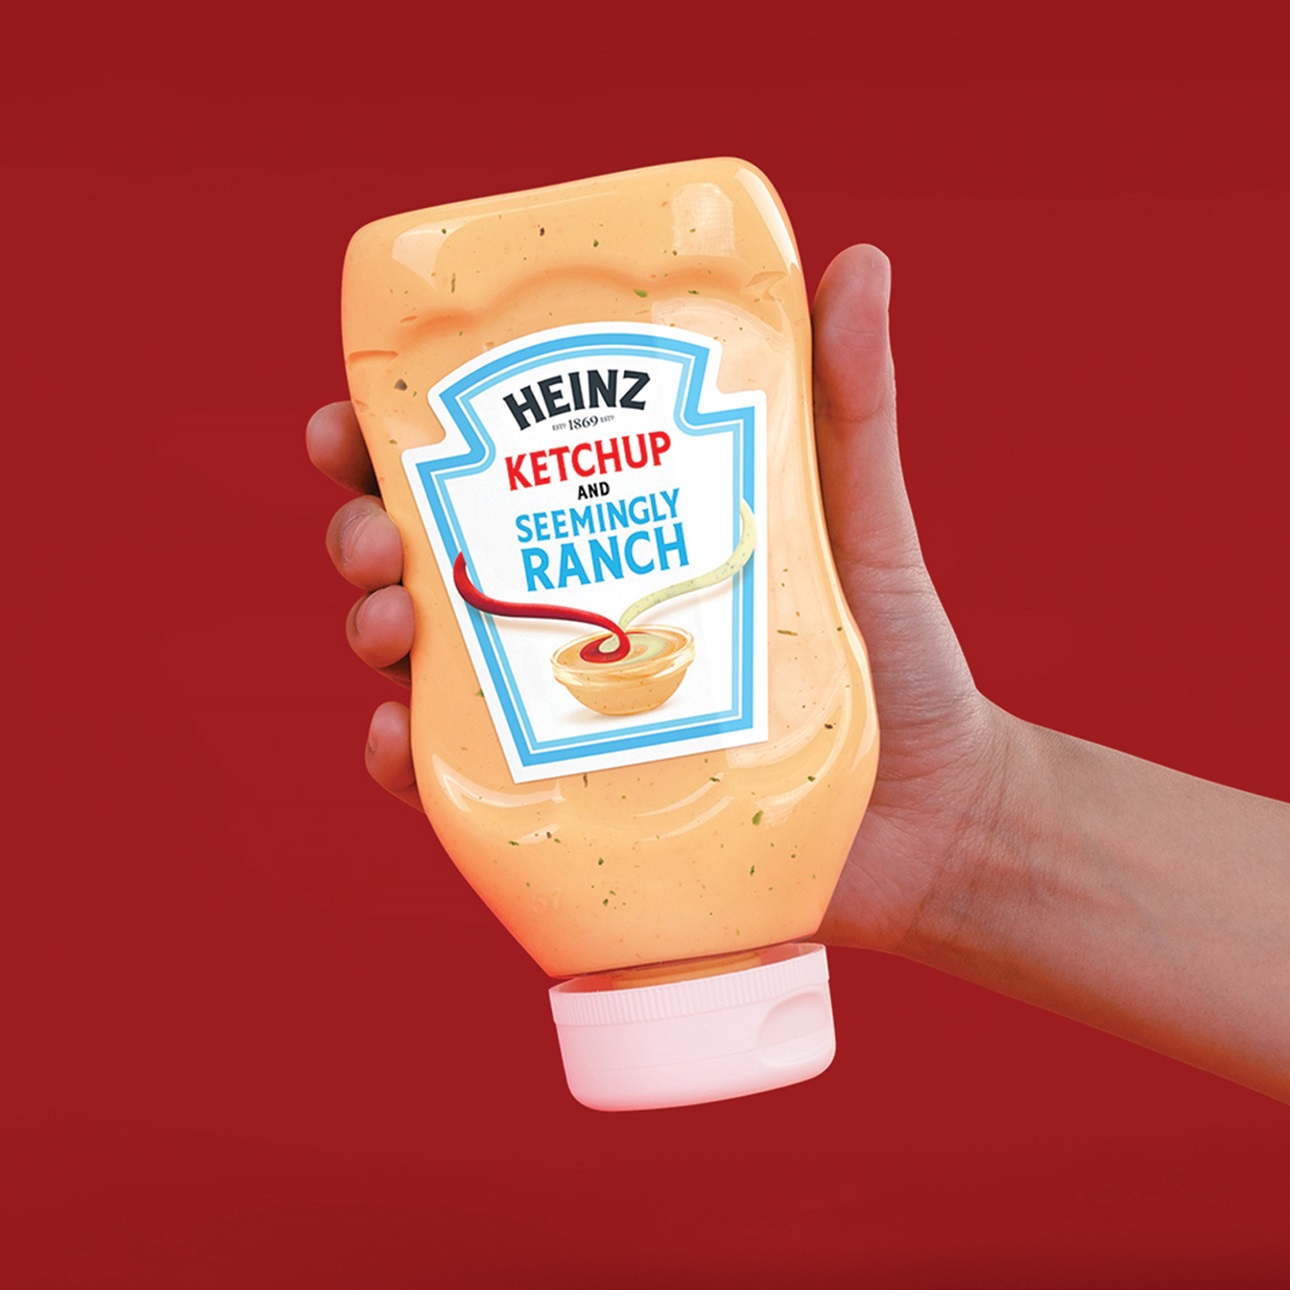 Kraft Heinz limited-edition Ketchup and Seemingly Ranch sauce